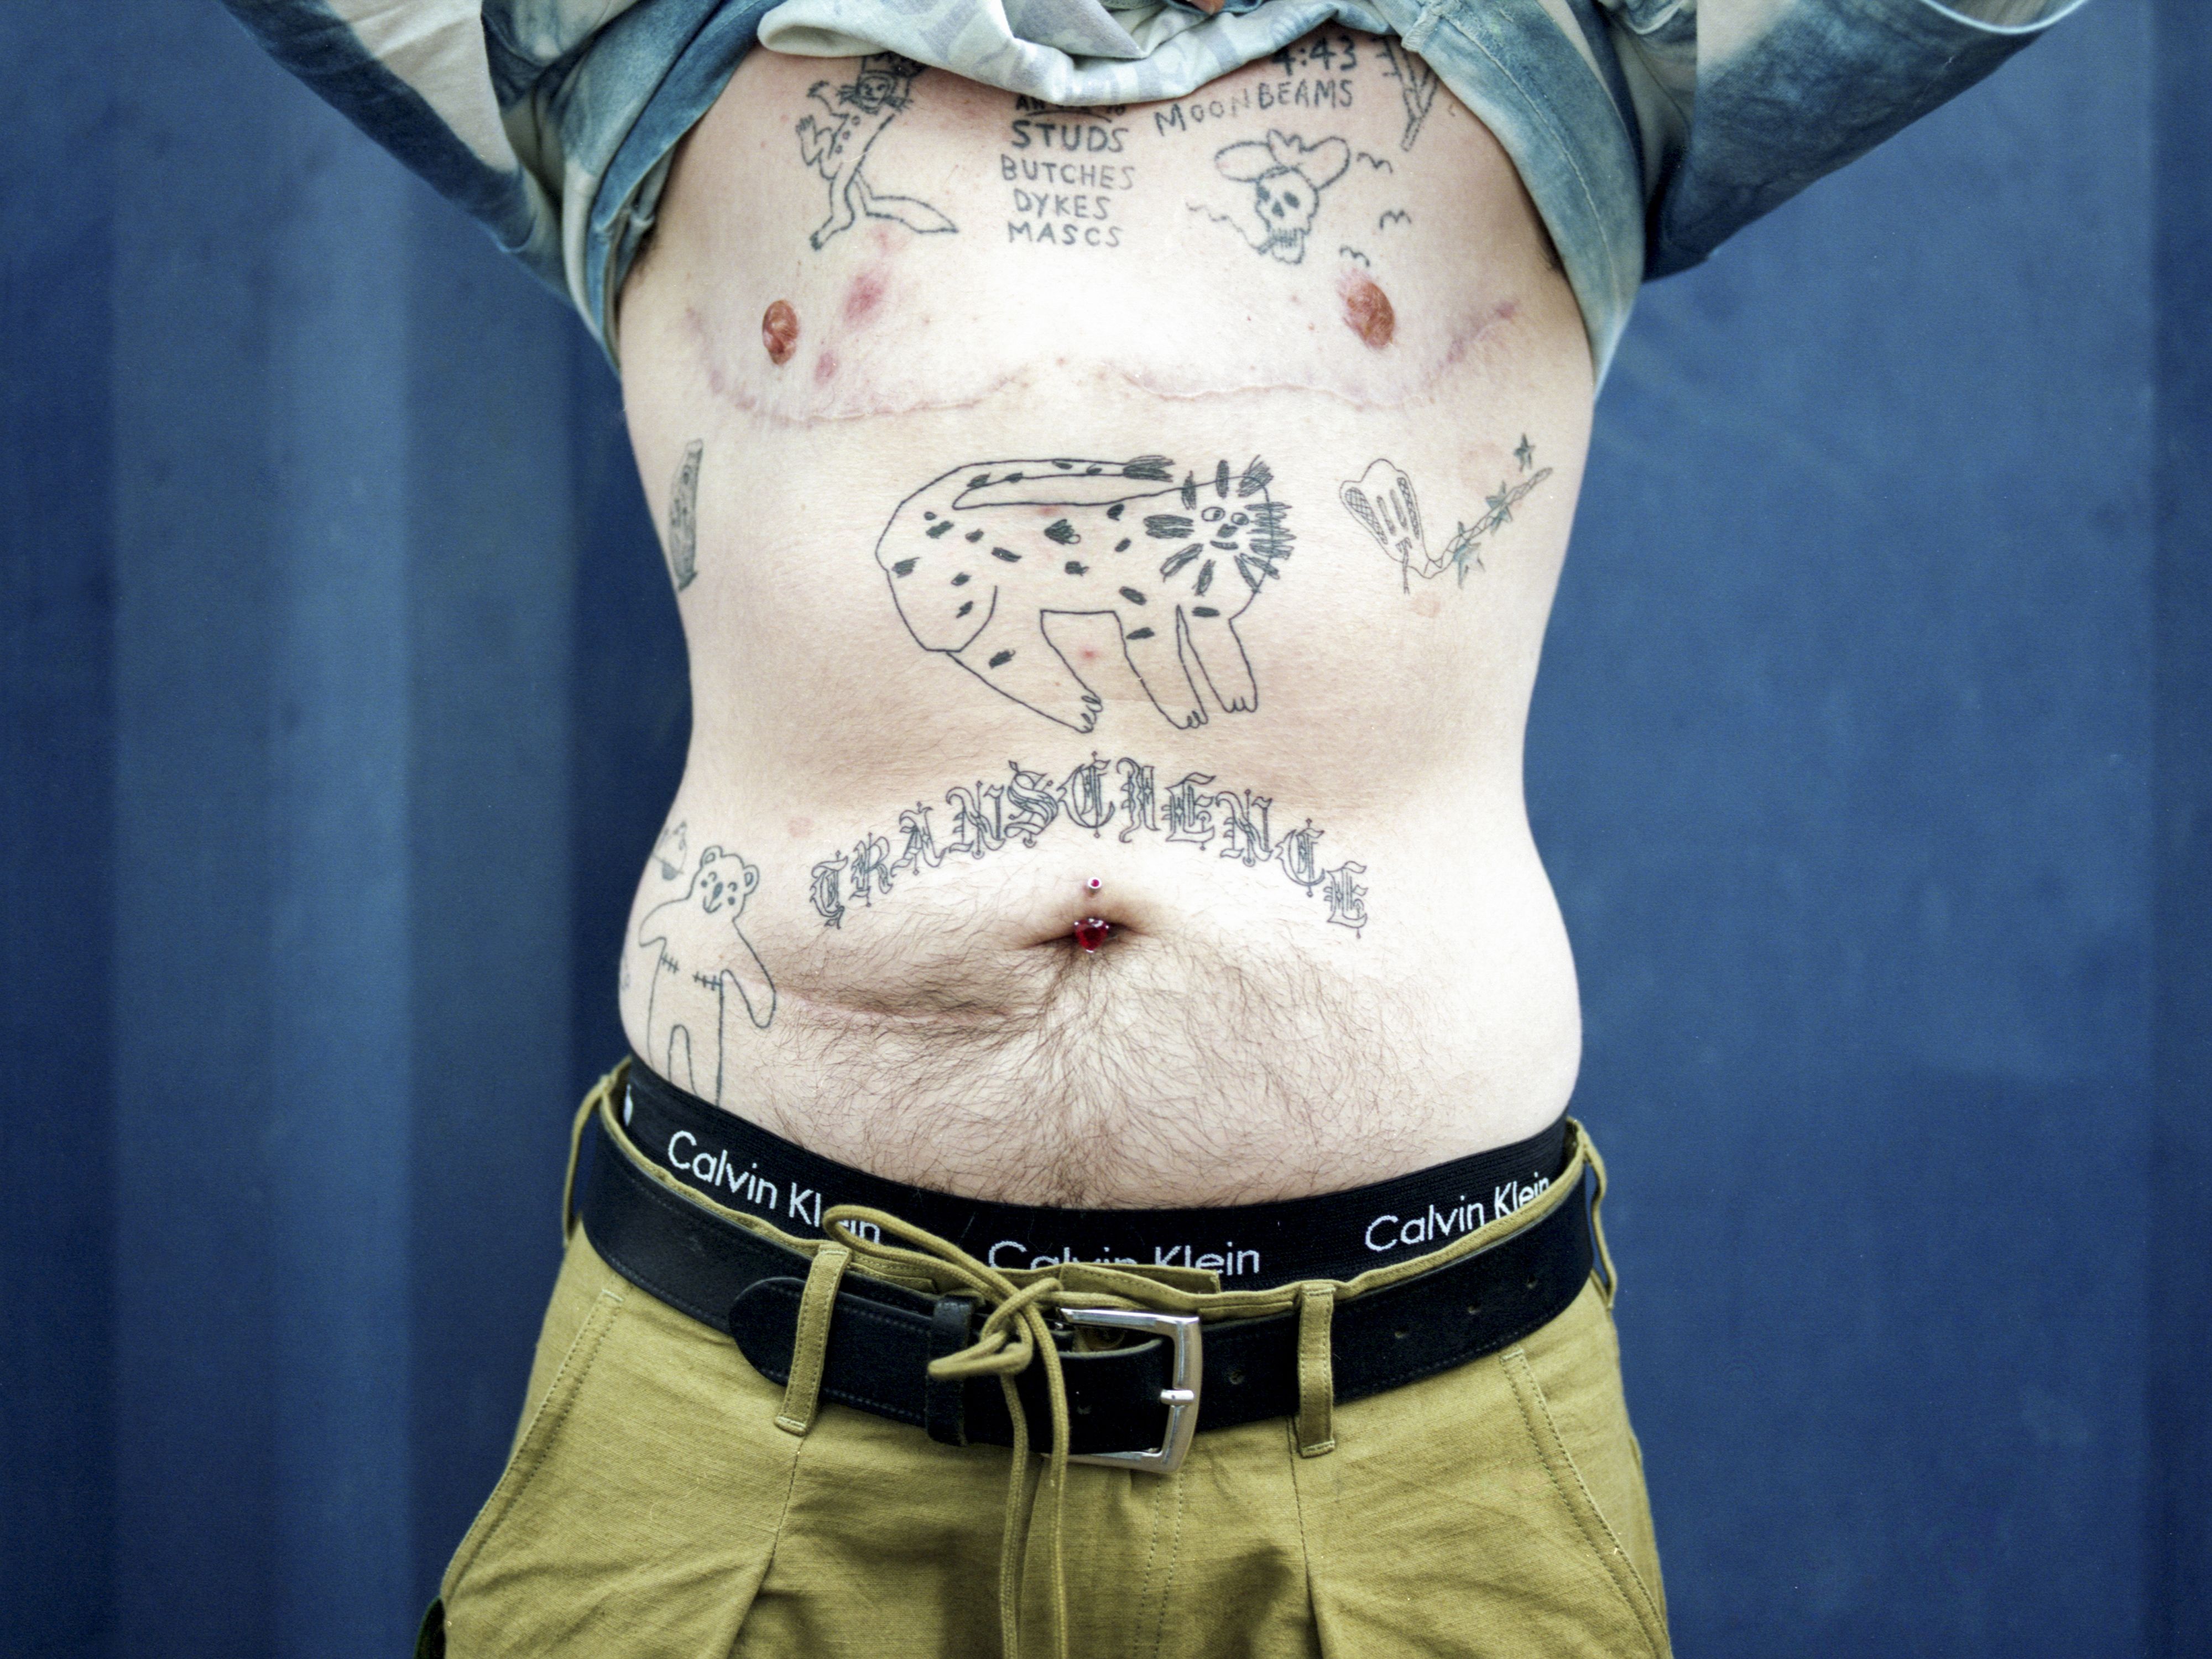 A person raises their shirt to reveal a chest covered in tattoos. The tattoos are of a doodle-like, cartoonish style.